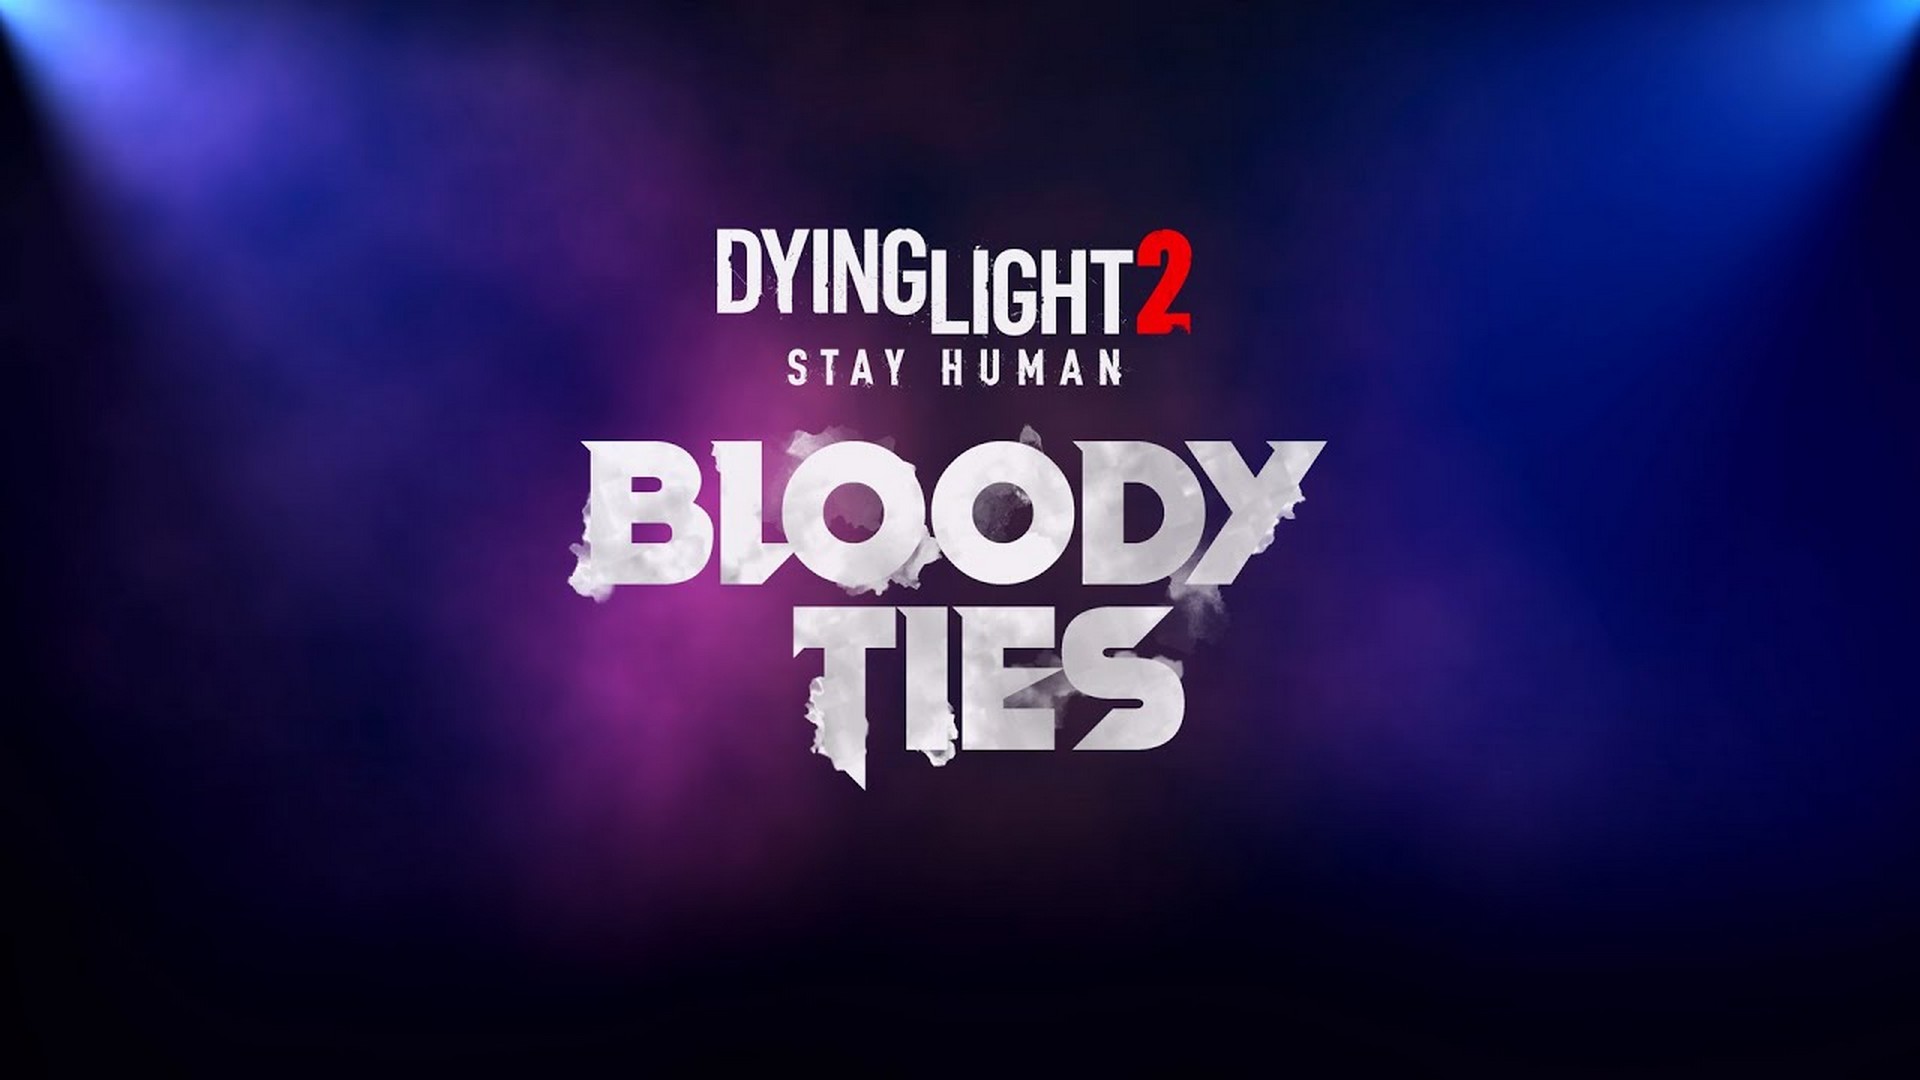 First Look Teaser Of Dying Light 2 Stay Human: Bloody Ties Story DLC Revealed